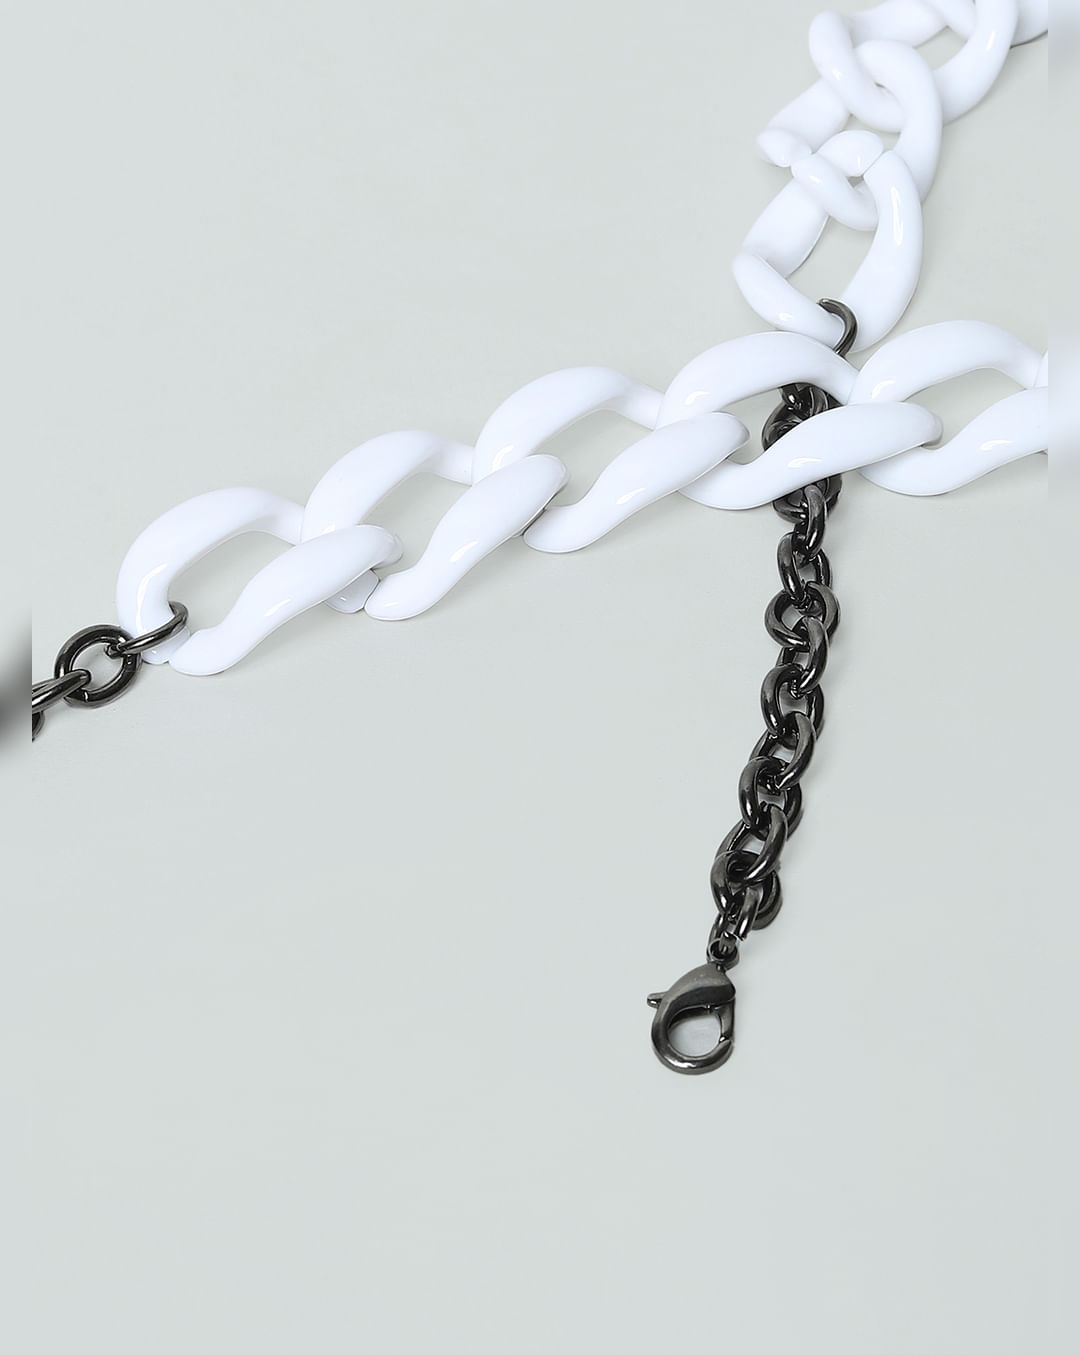 Jeans Chain - Buy Jeans Chain online in India